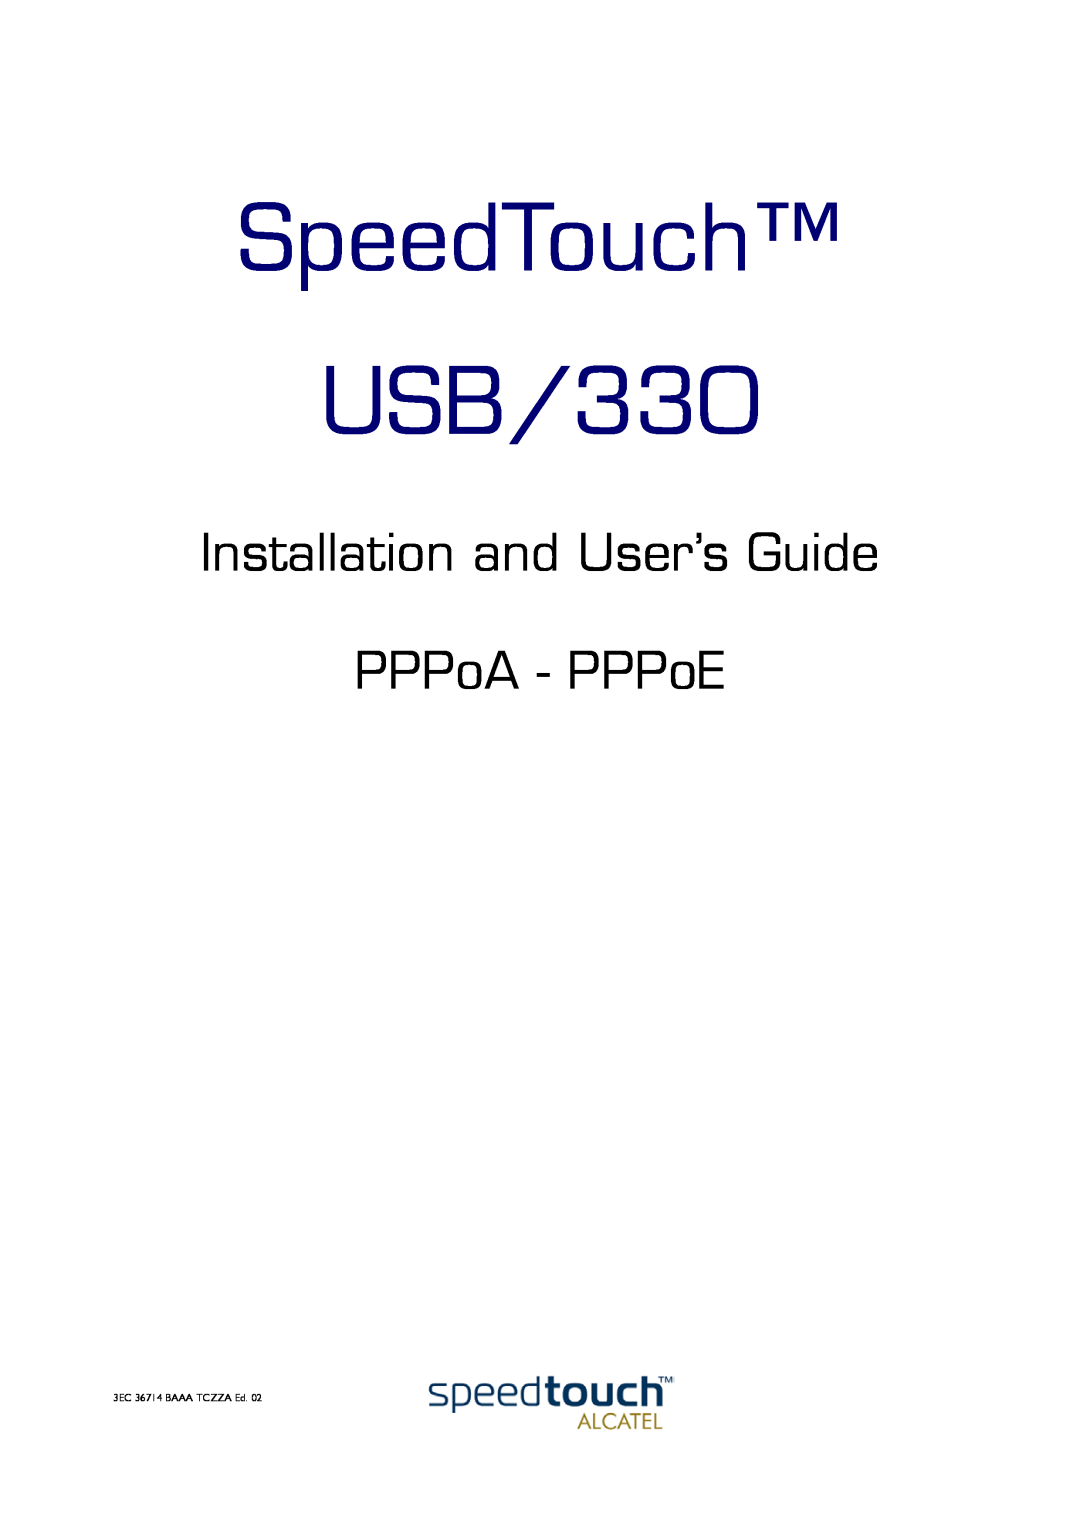 RCA 300 manual SpeedTouch USB/330, Installation and User’s Guide PPPoA - PPPoE 